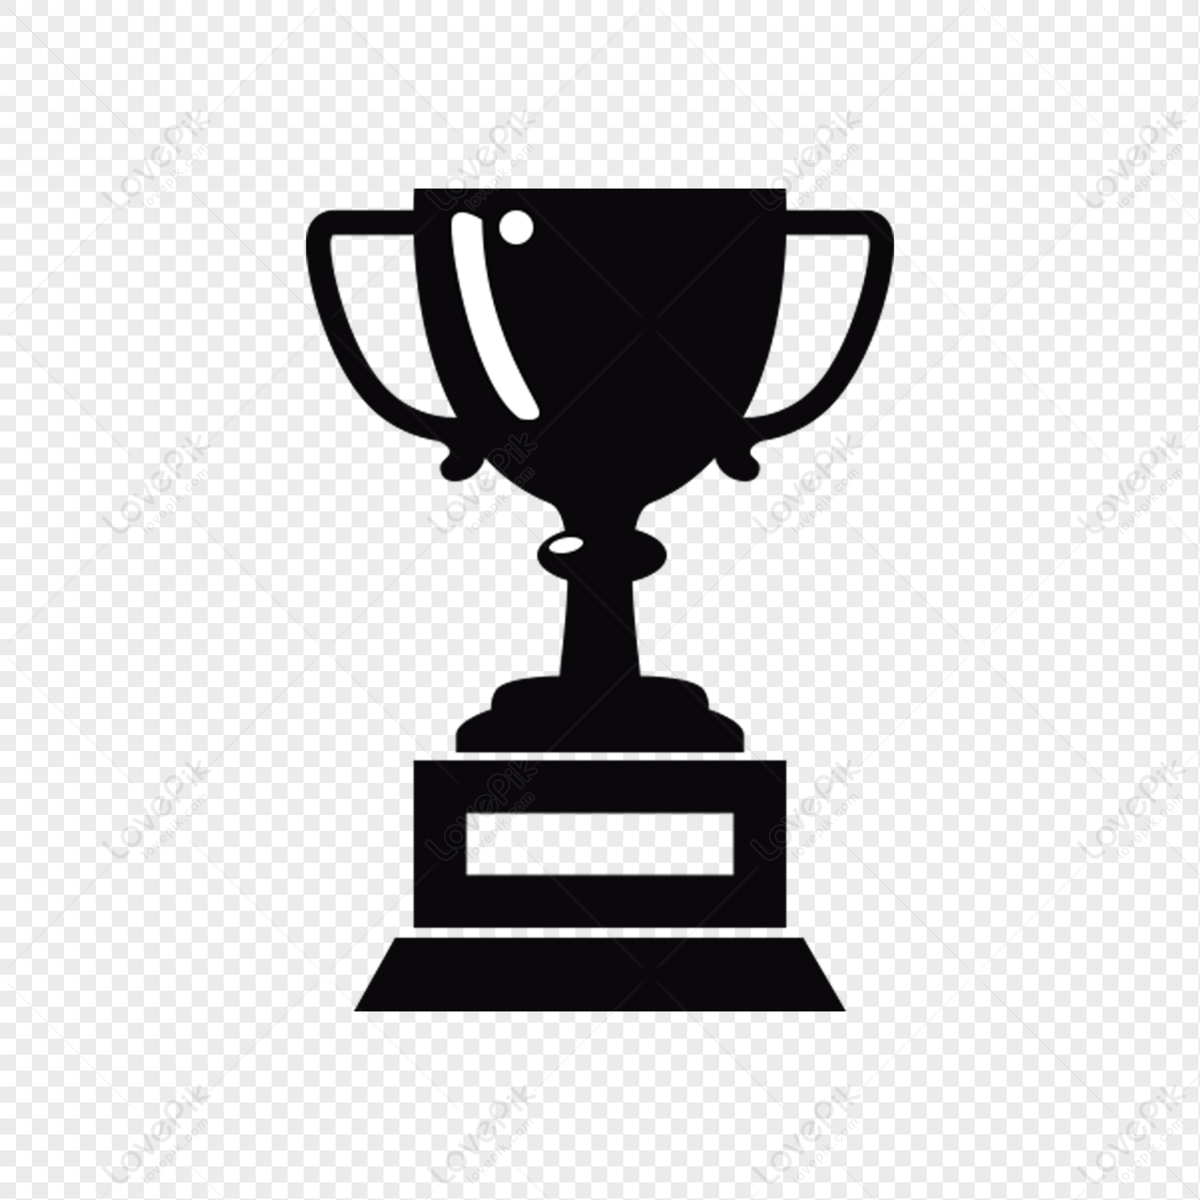 Award trophy cup transparent image download, size: 464x600px